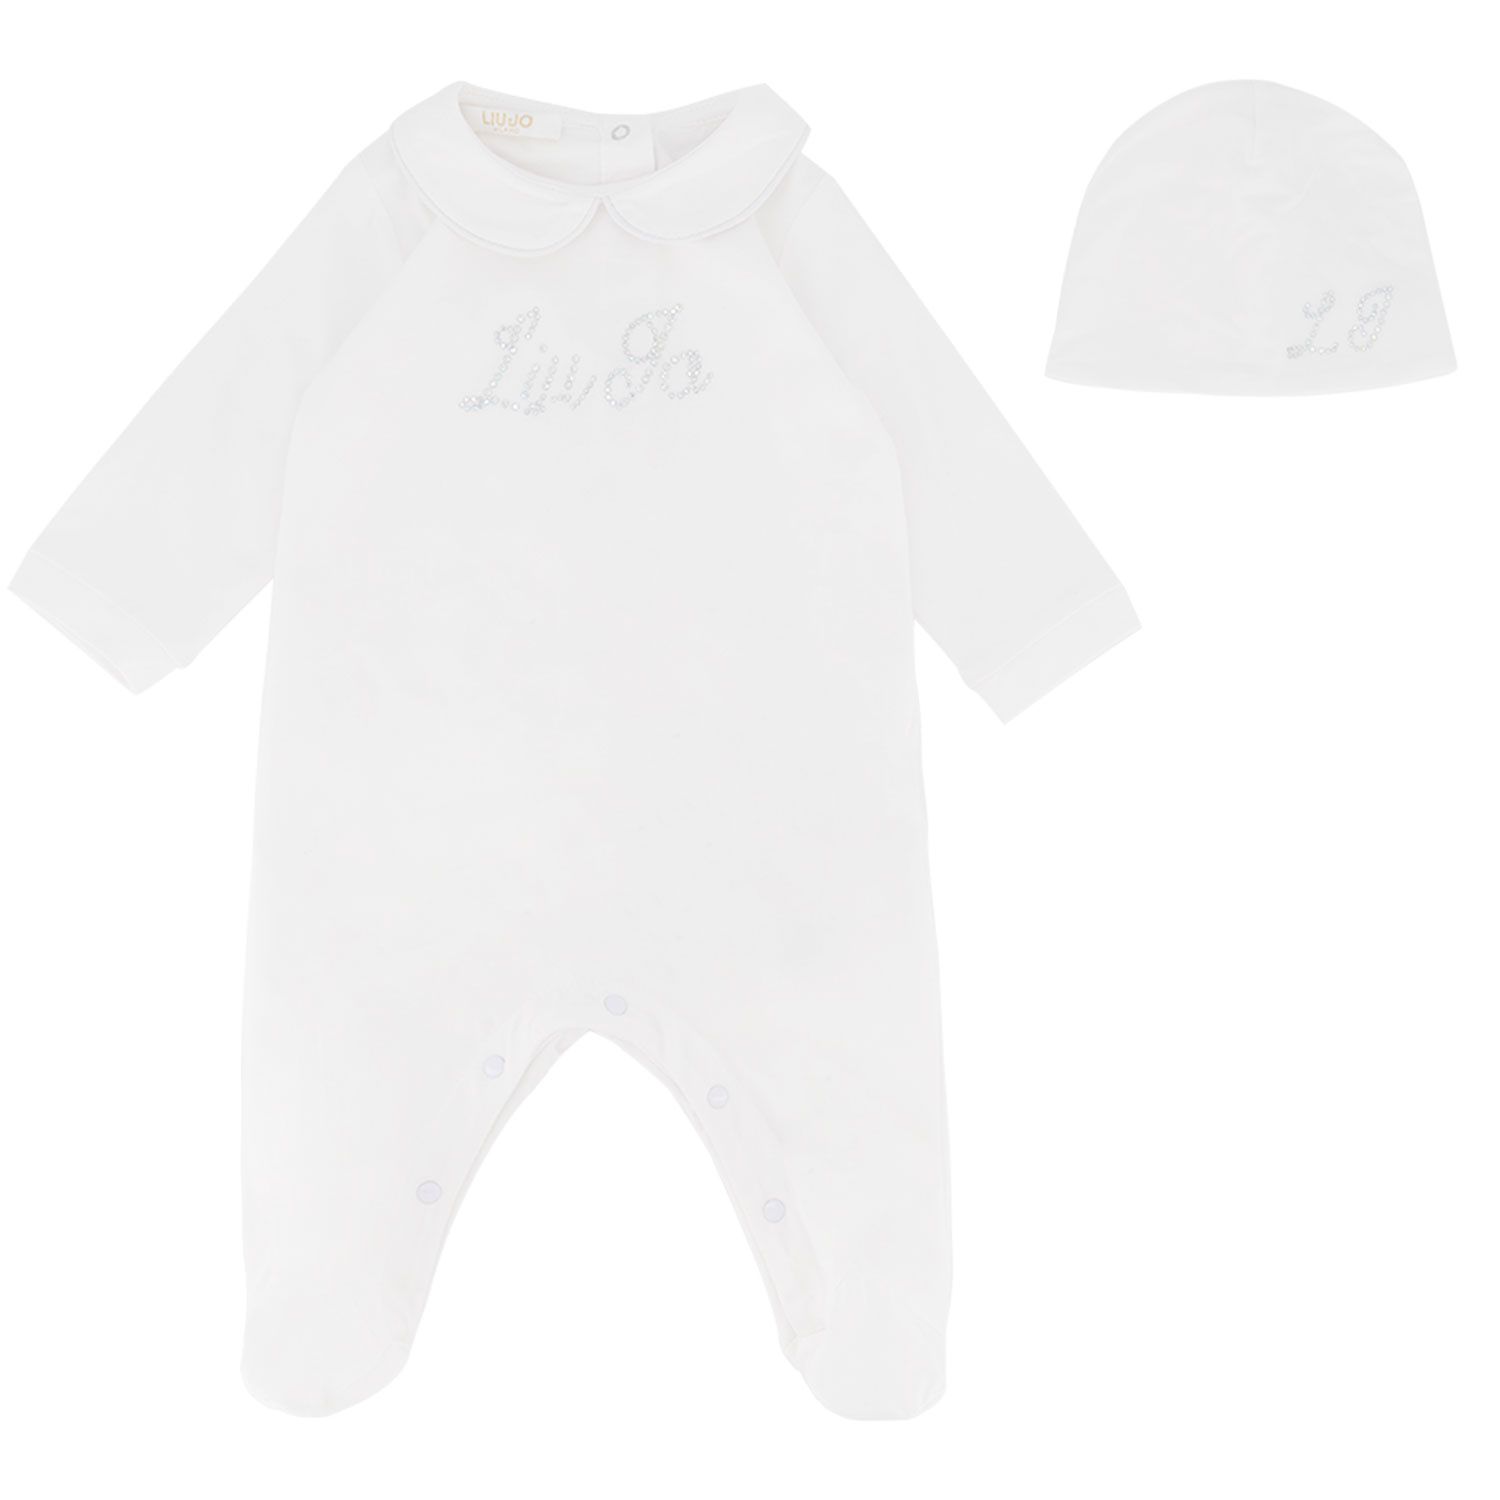 Picture of Liu Jo KA2120 baby playsuit white